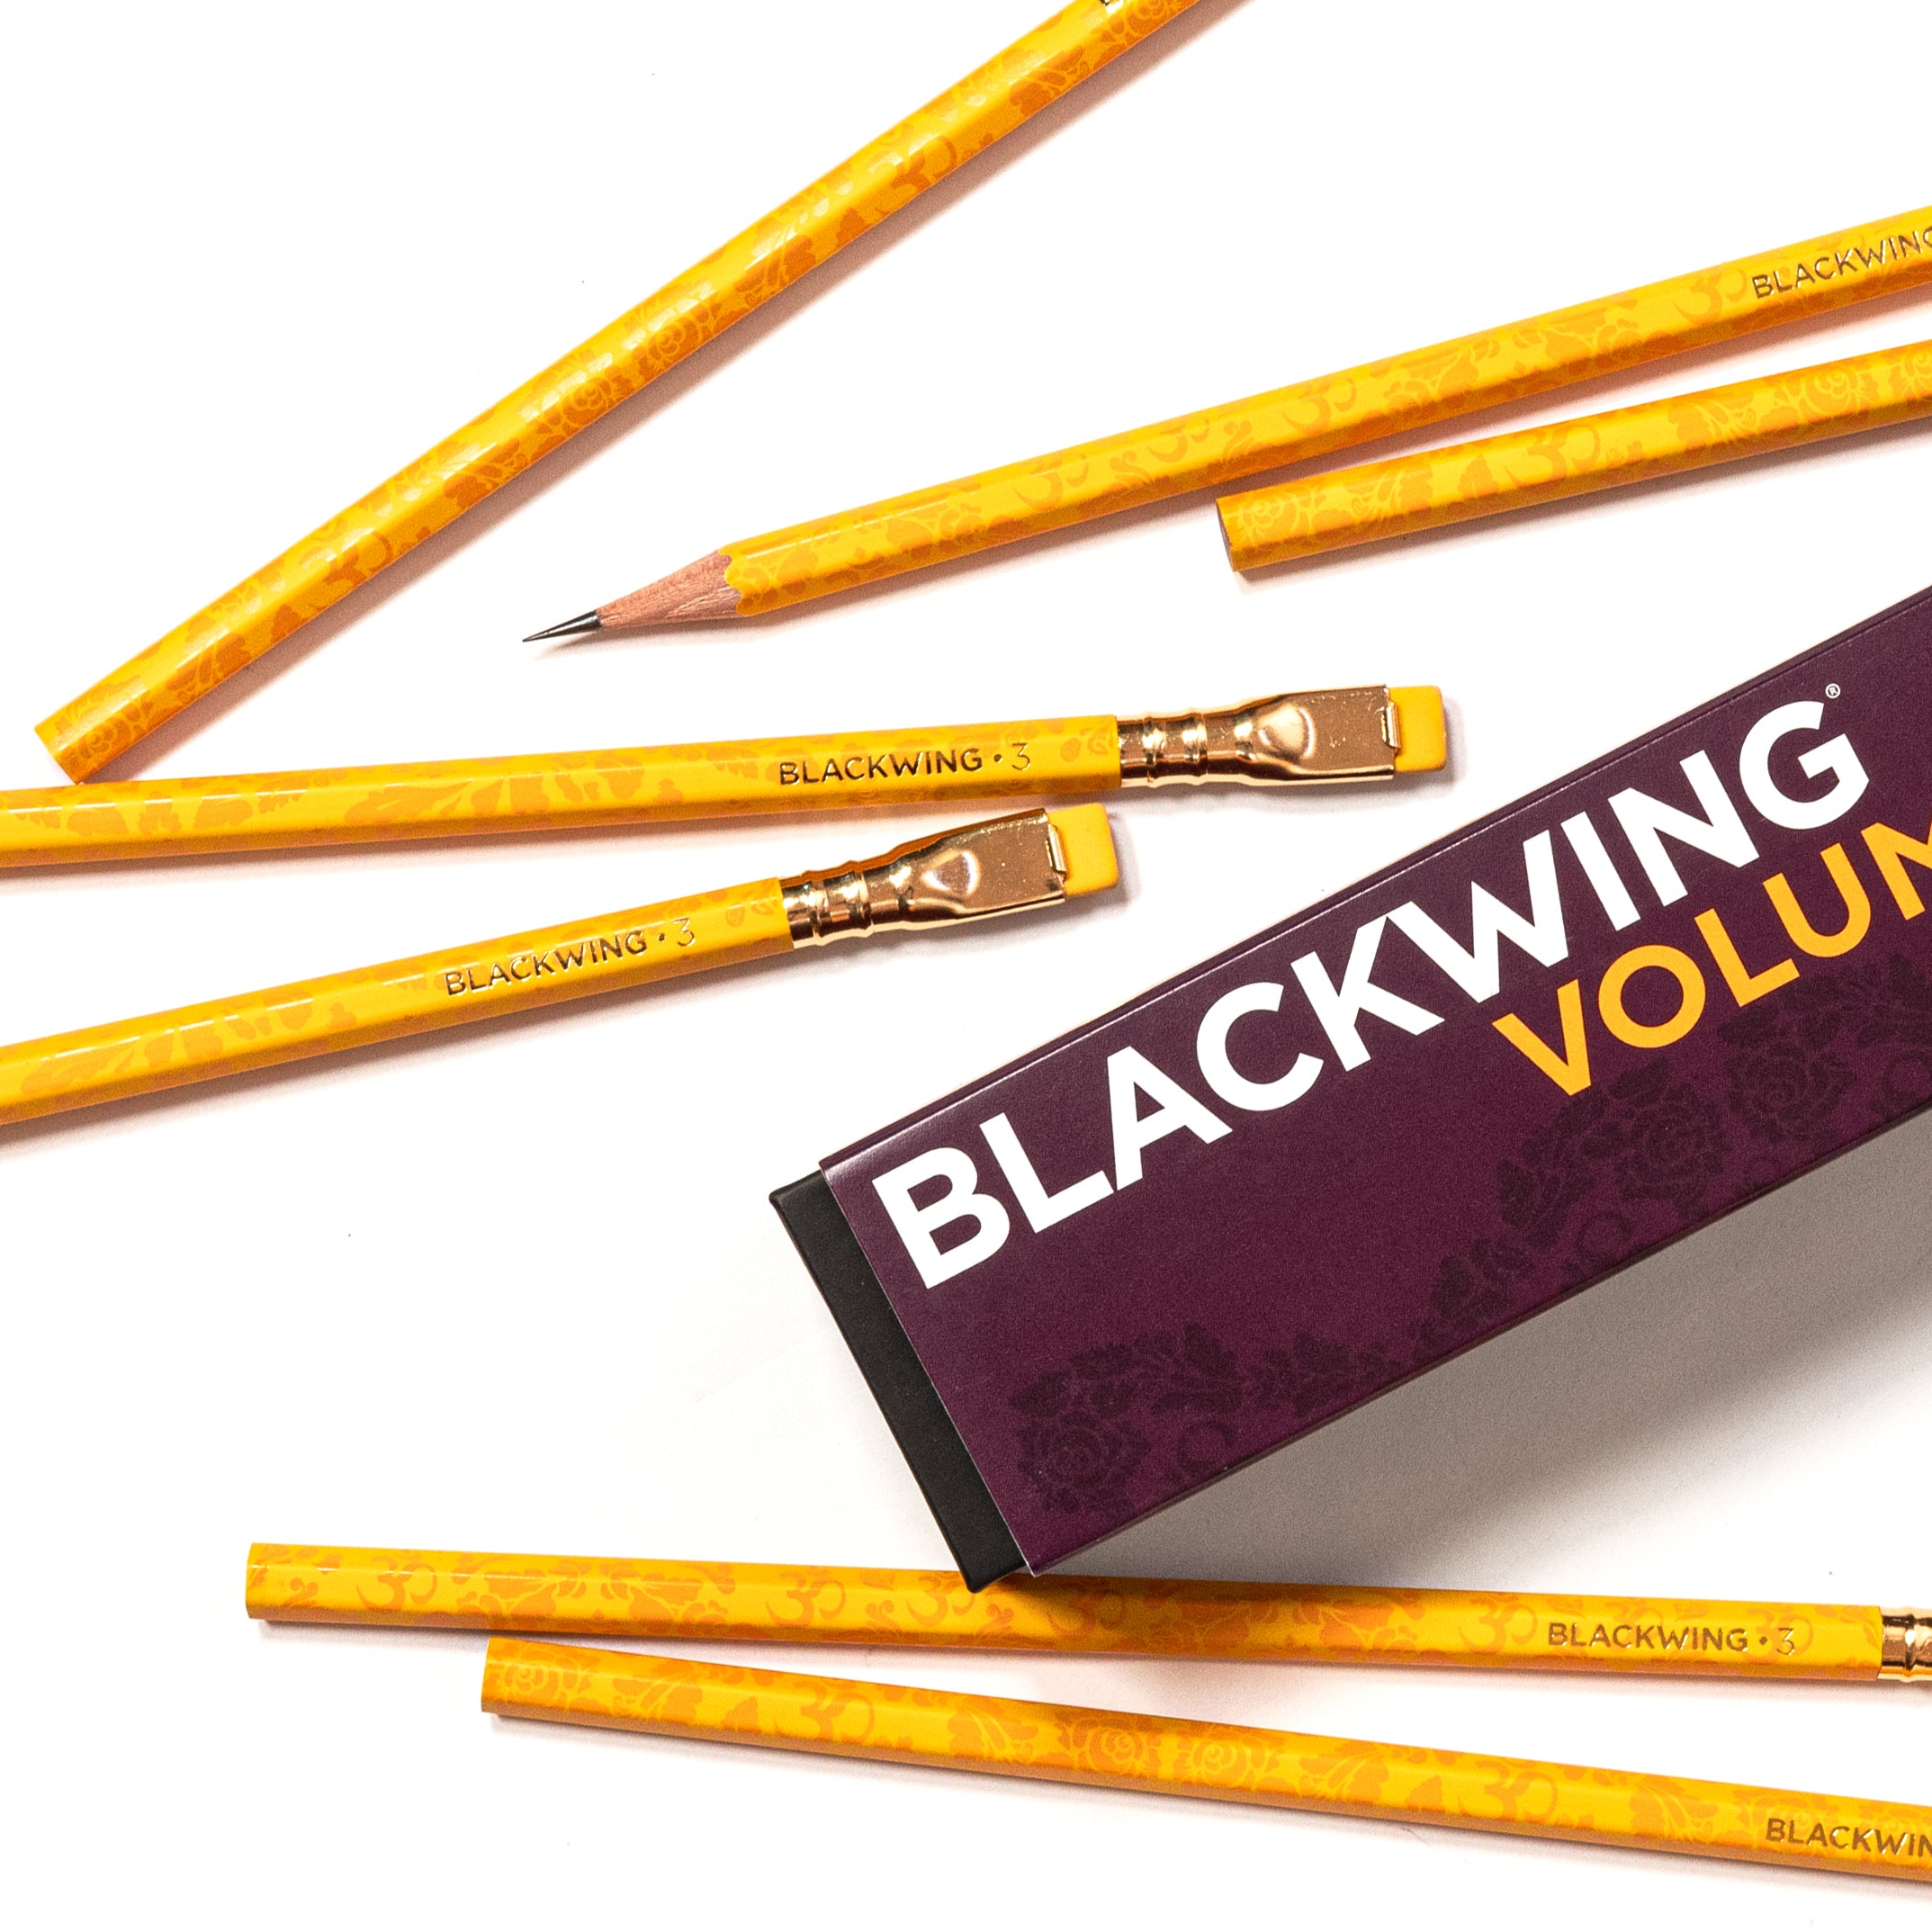 A Blackwing Volume 3 (Set of 12) on a white surface.